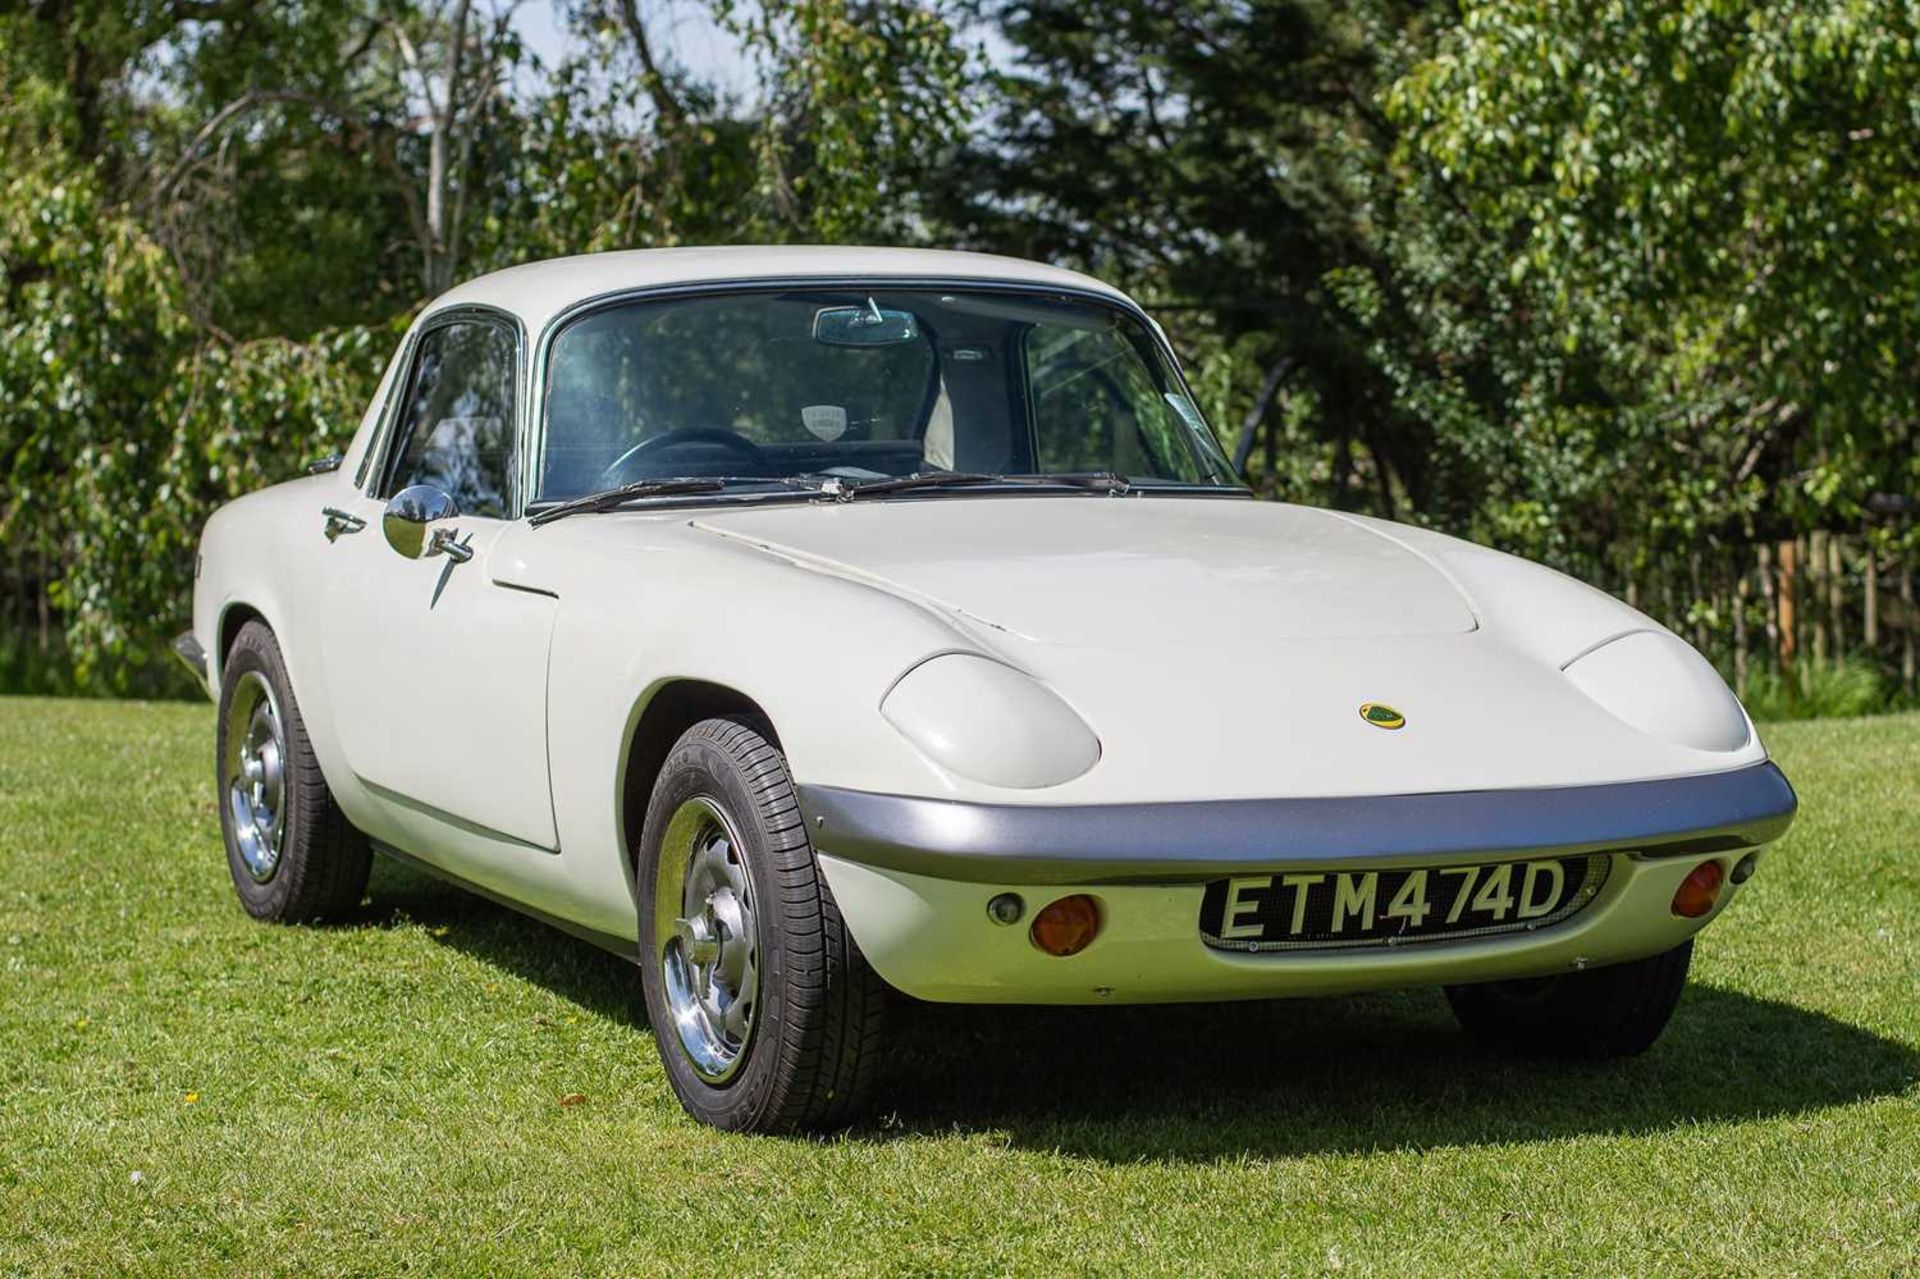 1966 Lotus Elan Fixed Head Coupe Sympathetically restored, equipped with desirable upgrades